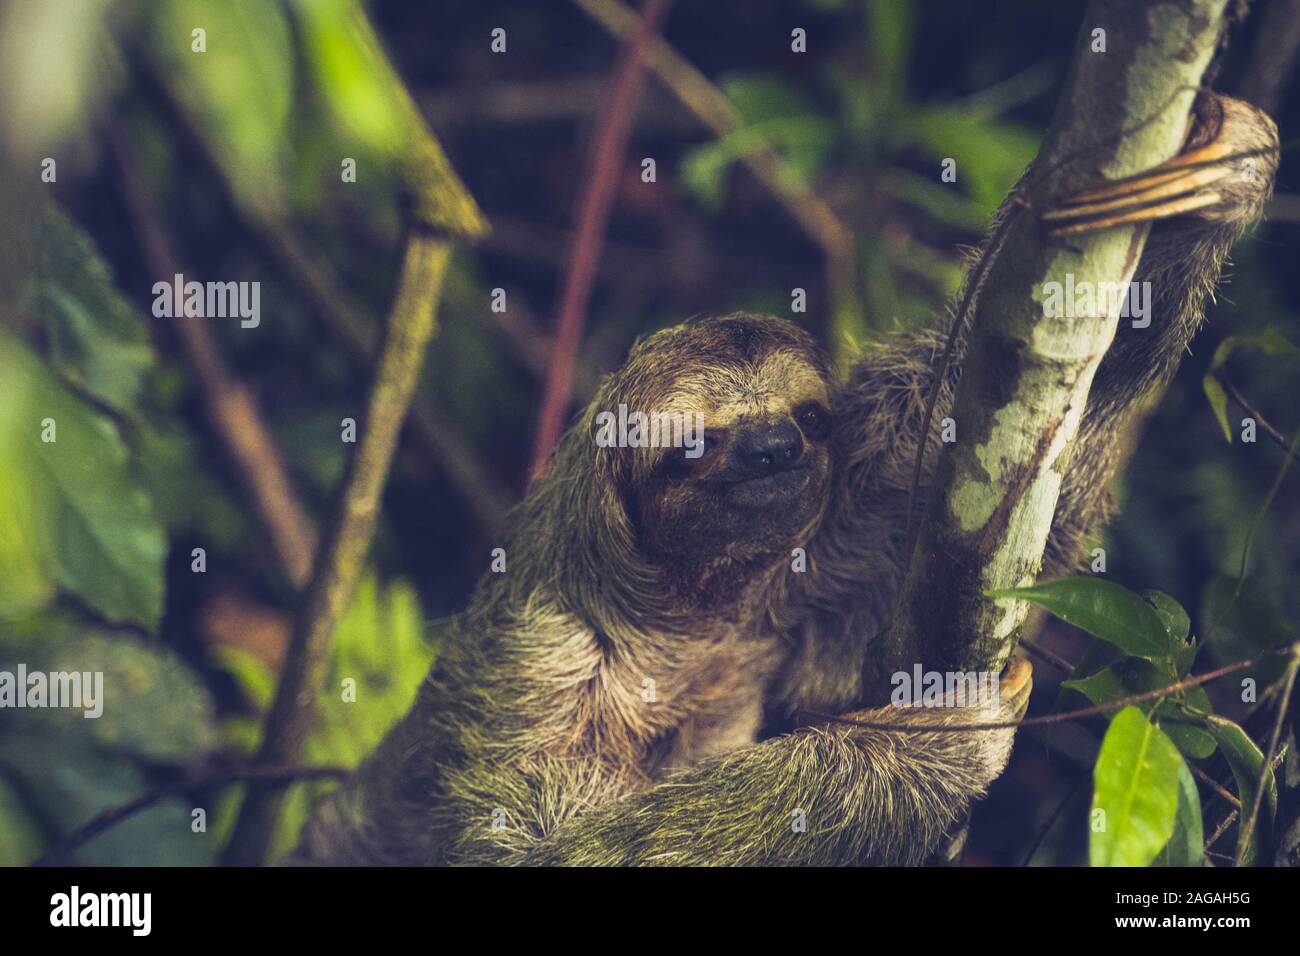 A Three-toed Sloth in the wild. Stock Photo